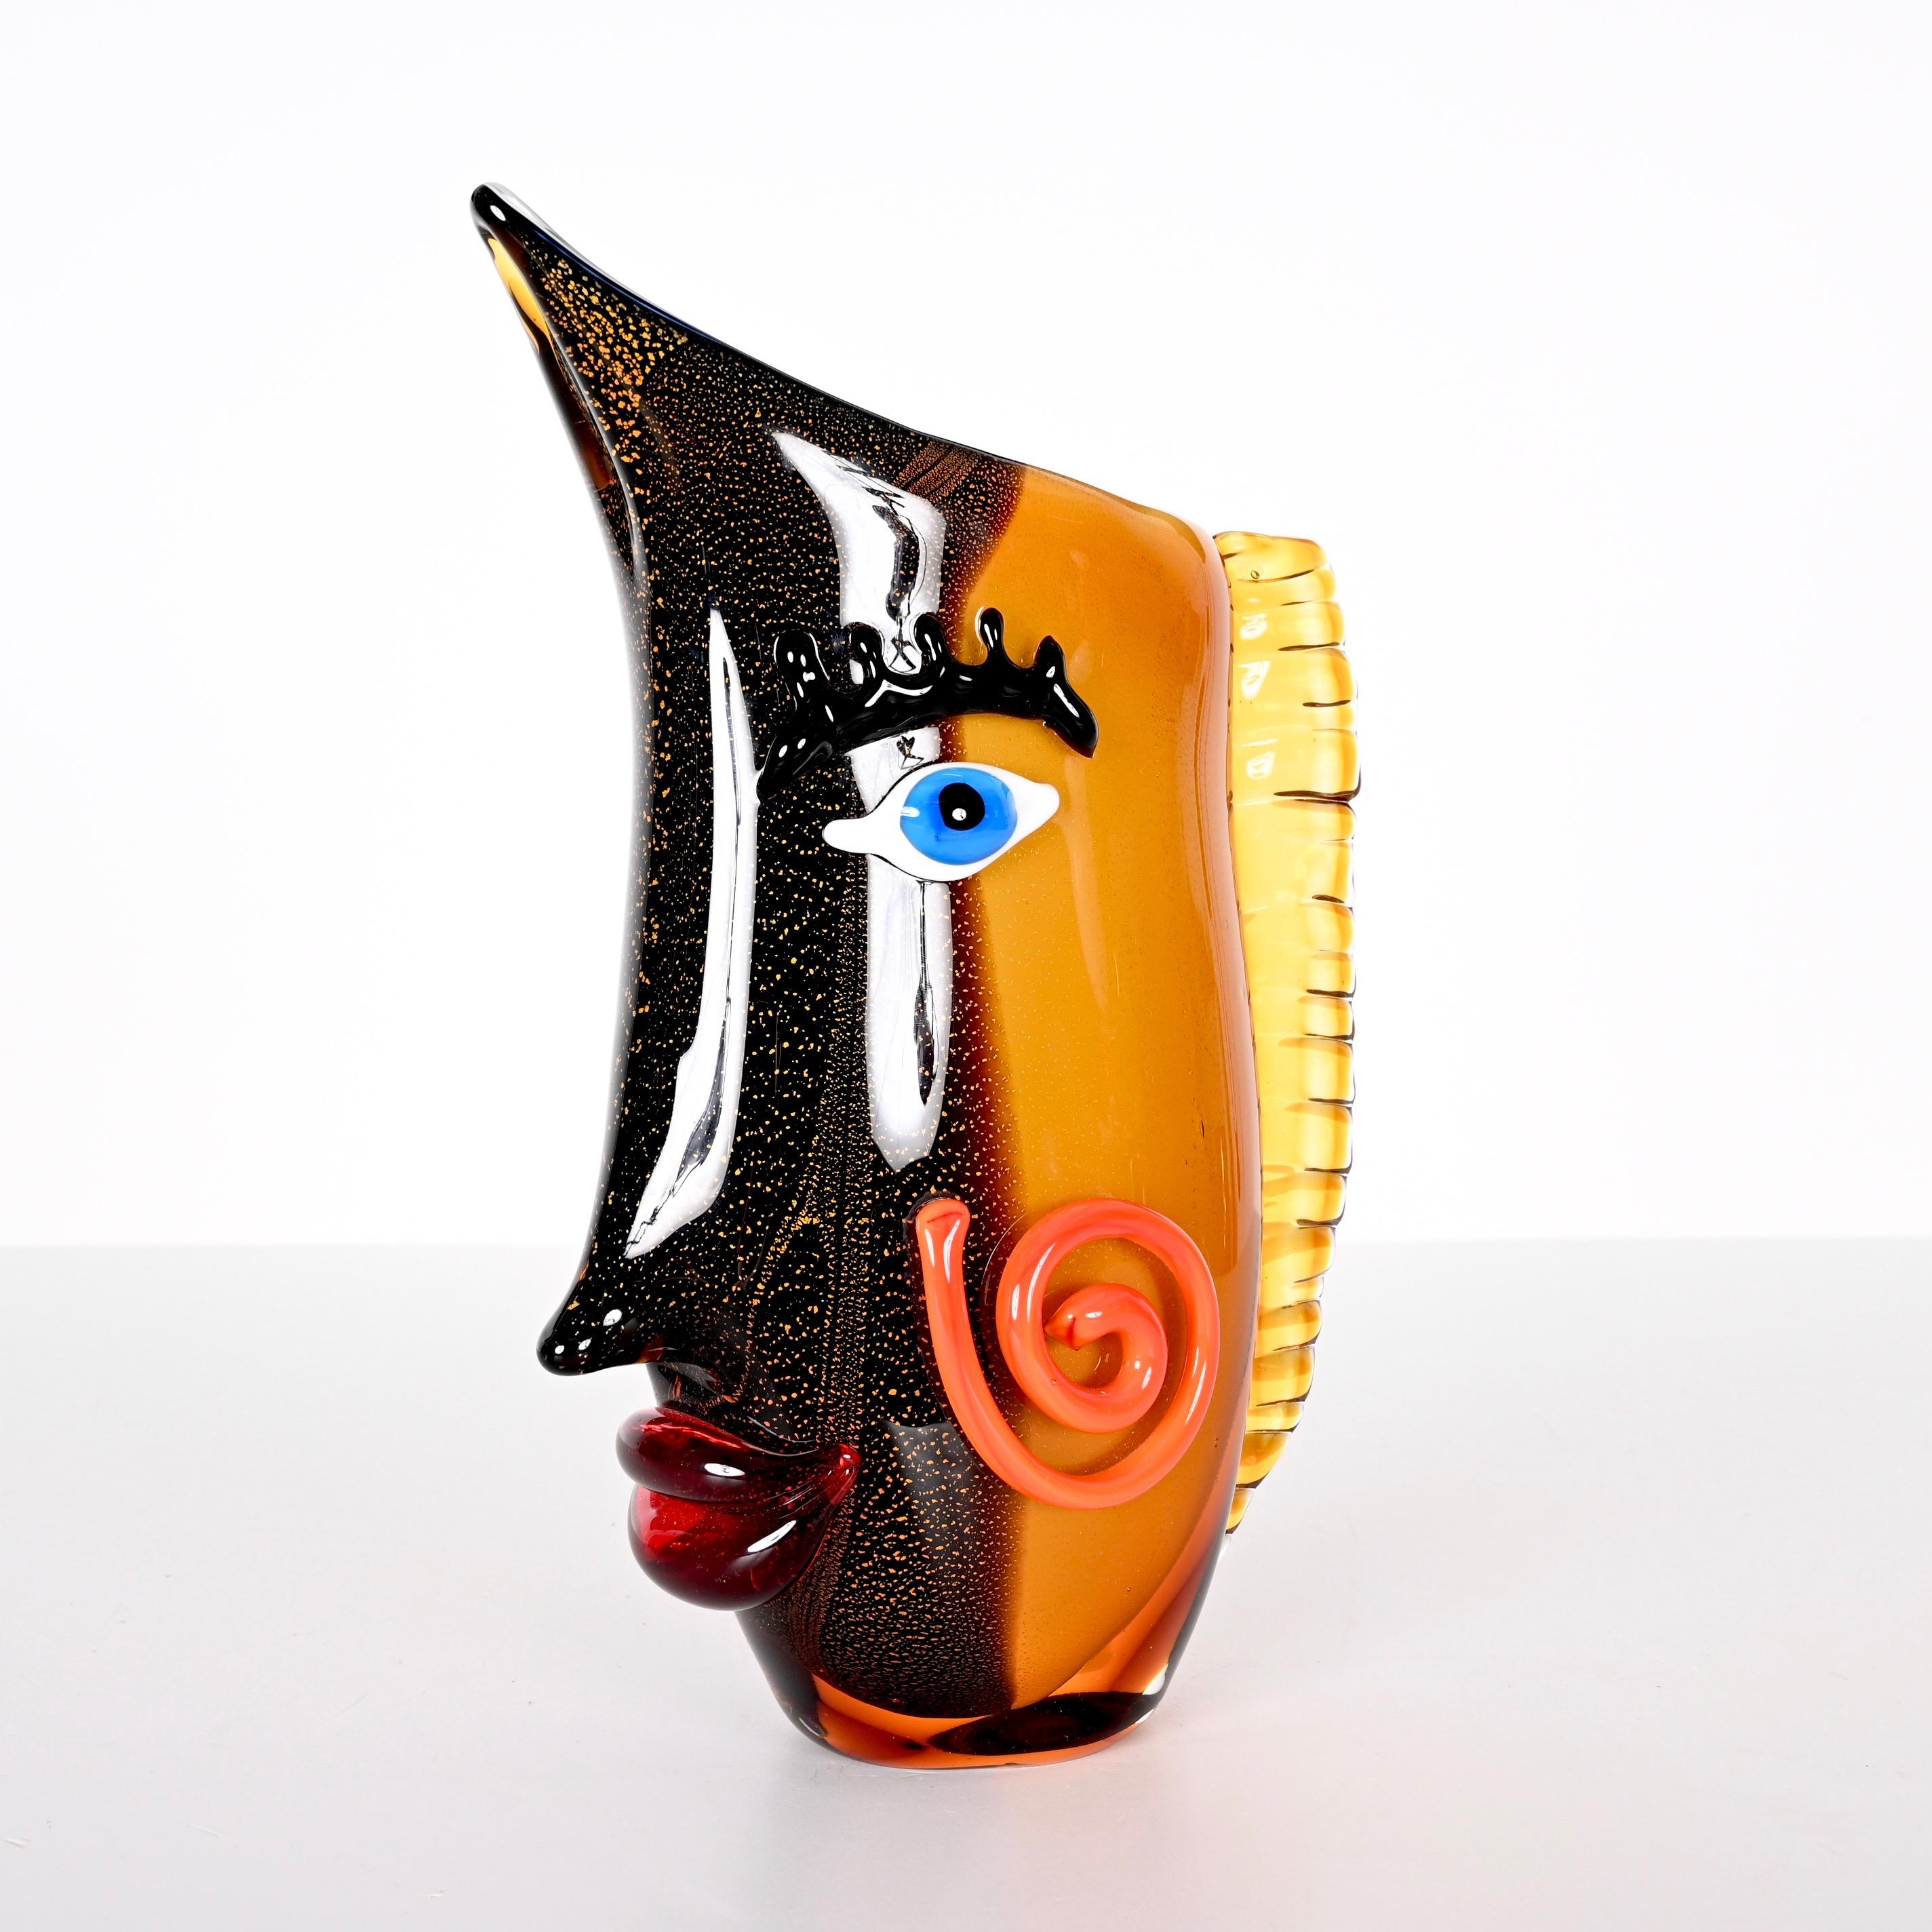 Mario Badioli after Picasso Black and Orange Sommerso Murano Glass Vase, 1980s For Sale 8